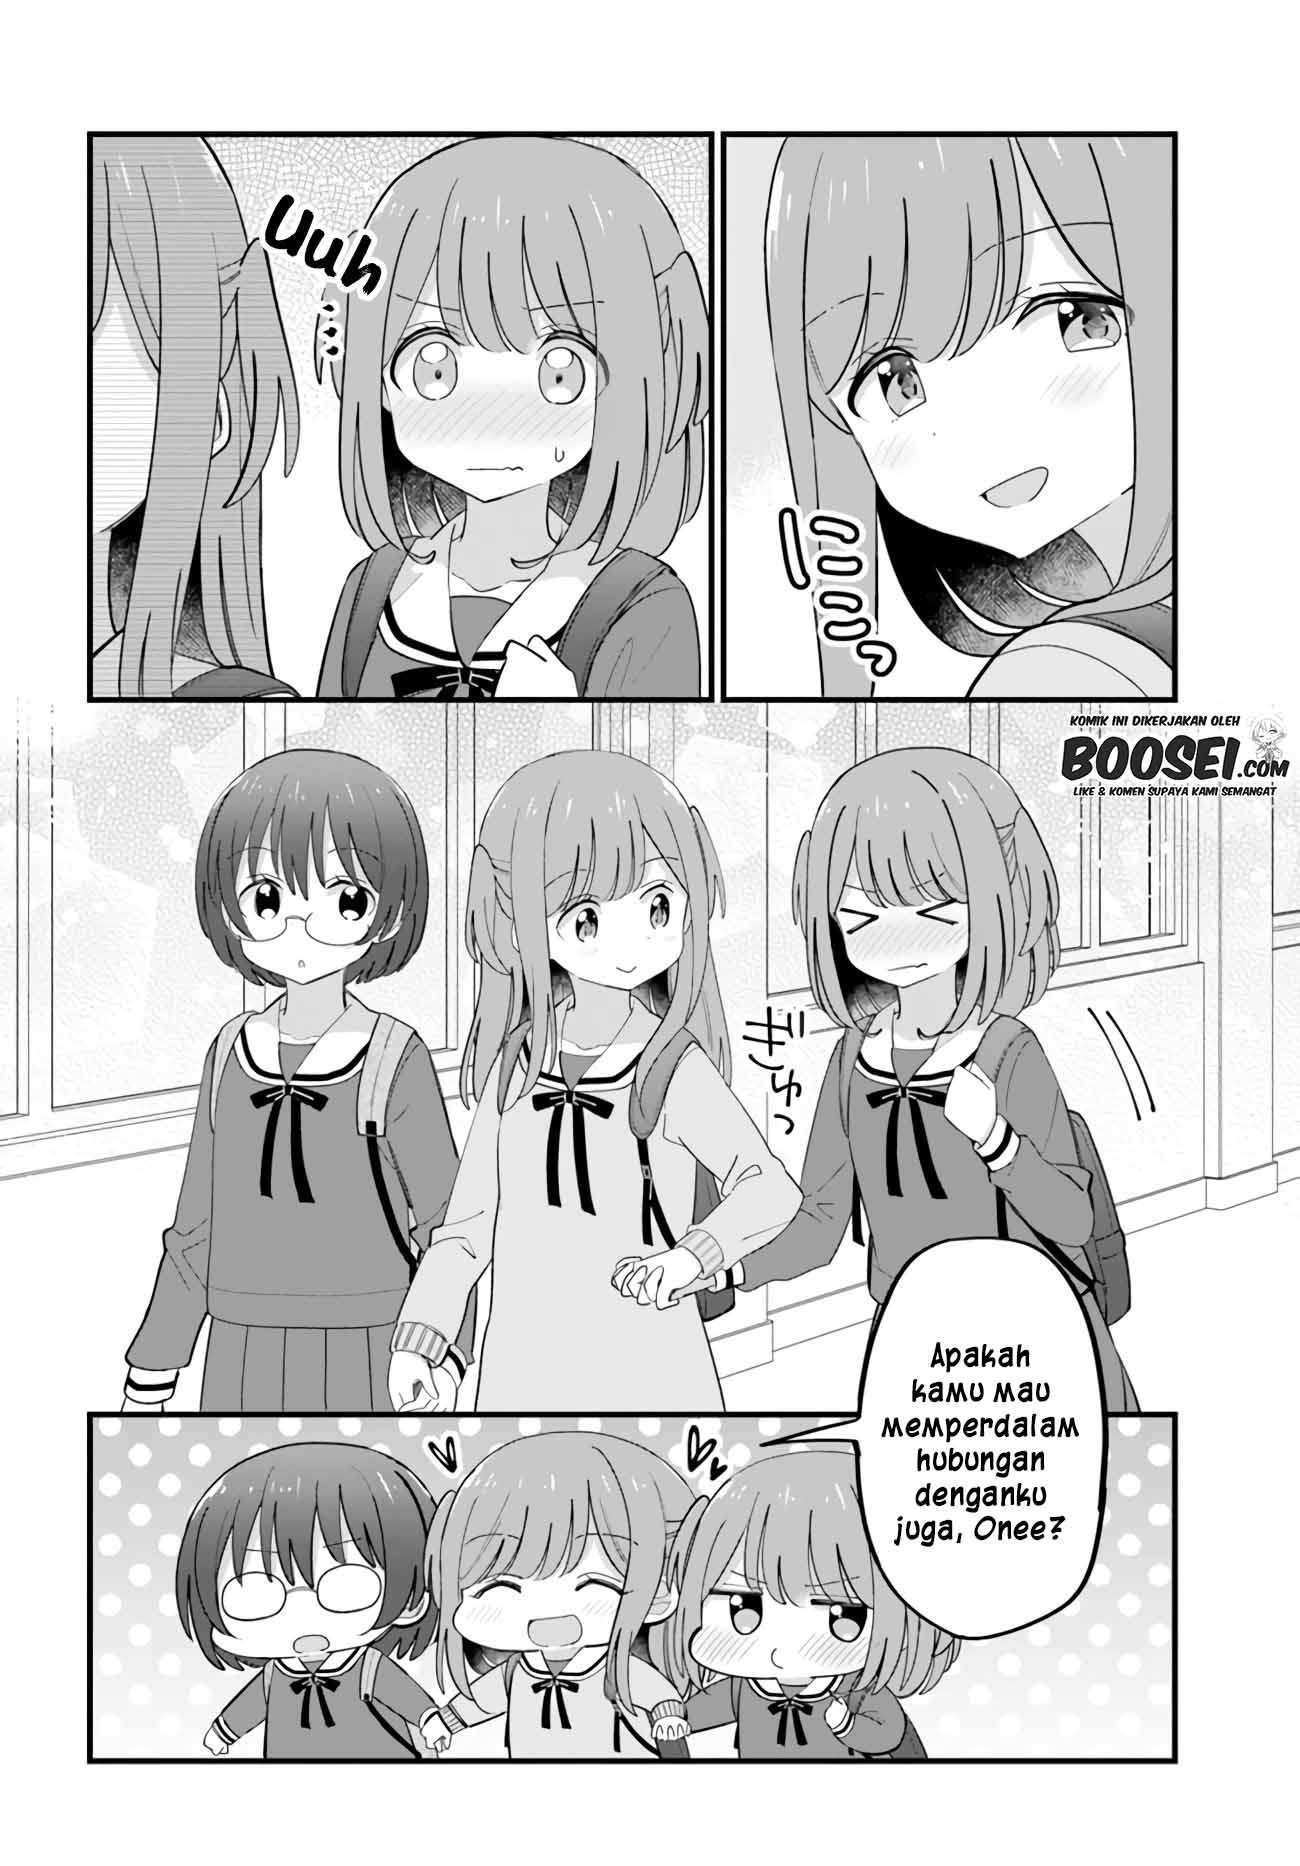 Mutually Unrequited Twin Sisters Chapter 26